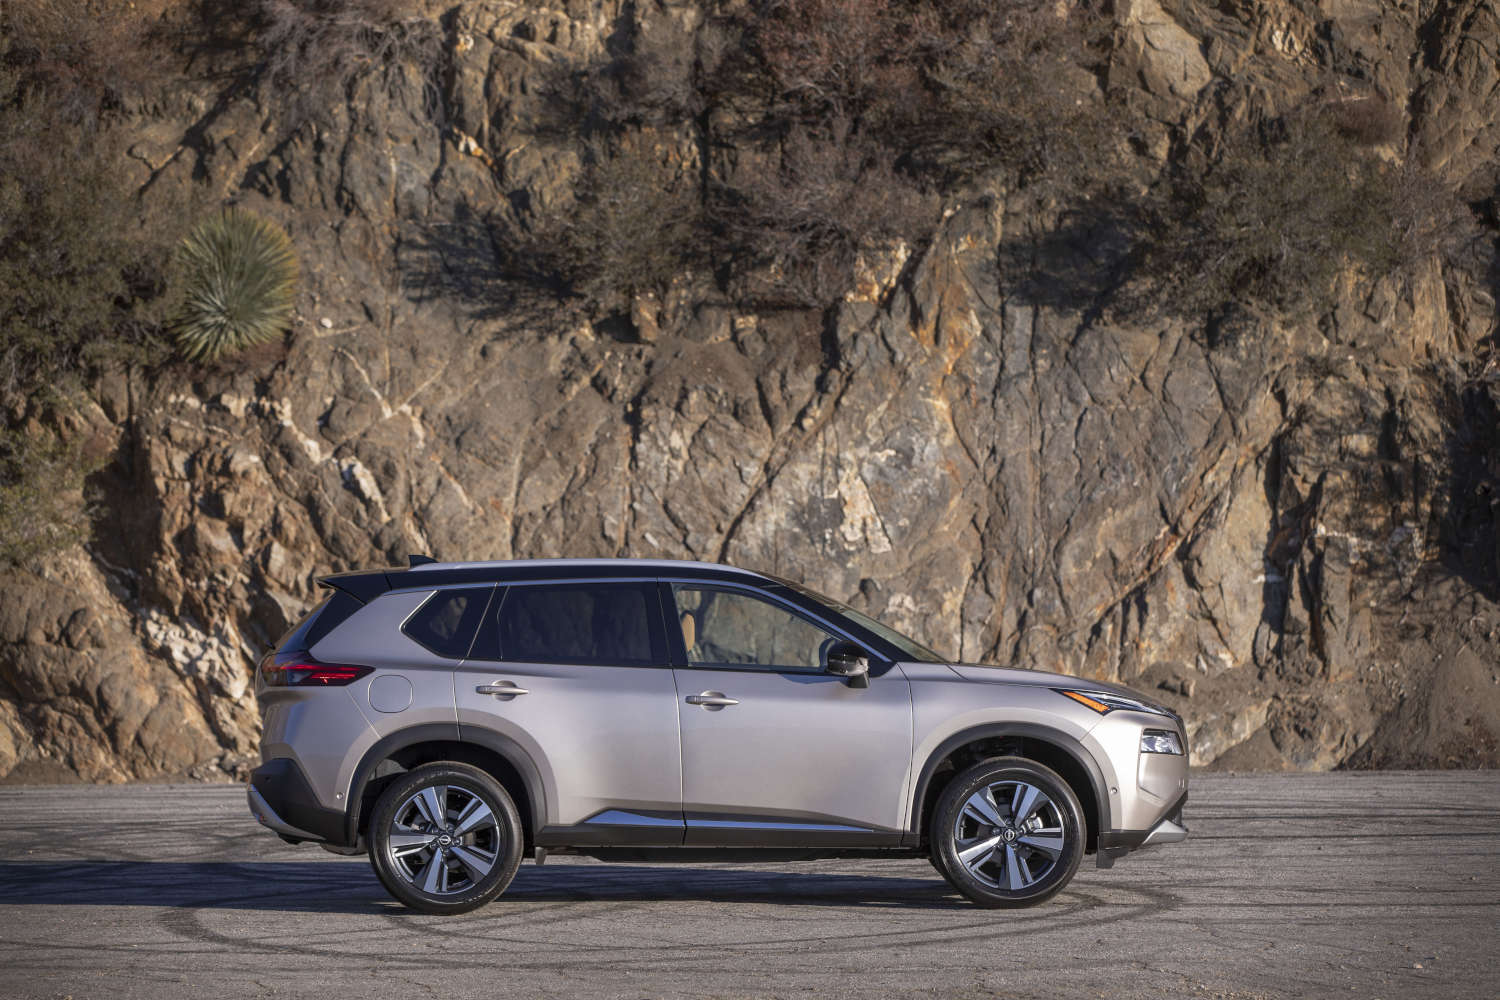 This surprising compact SUV is a Nissan Rogue in silver